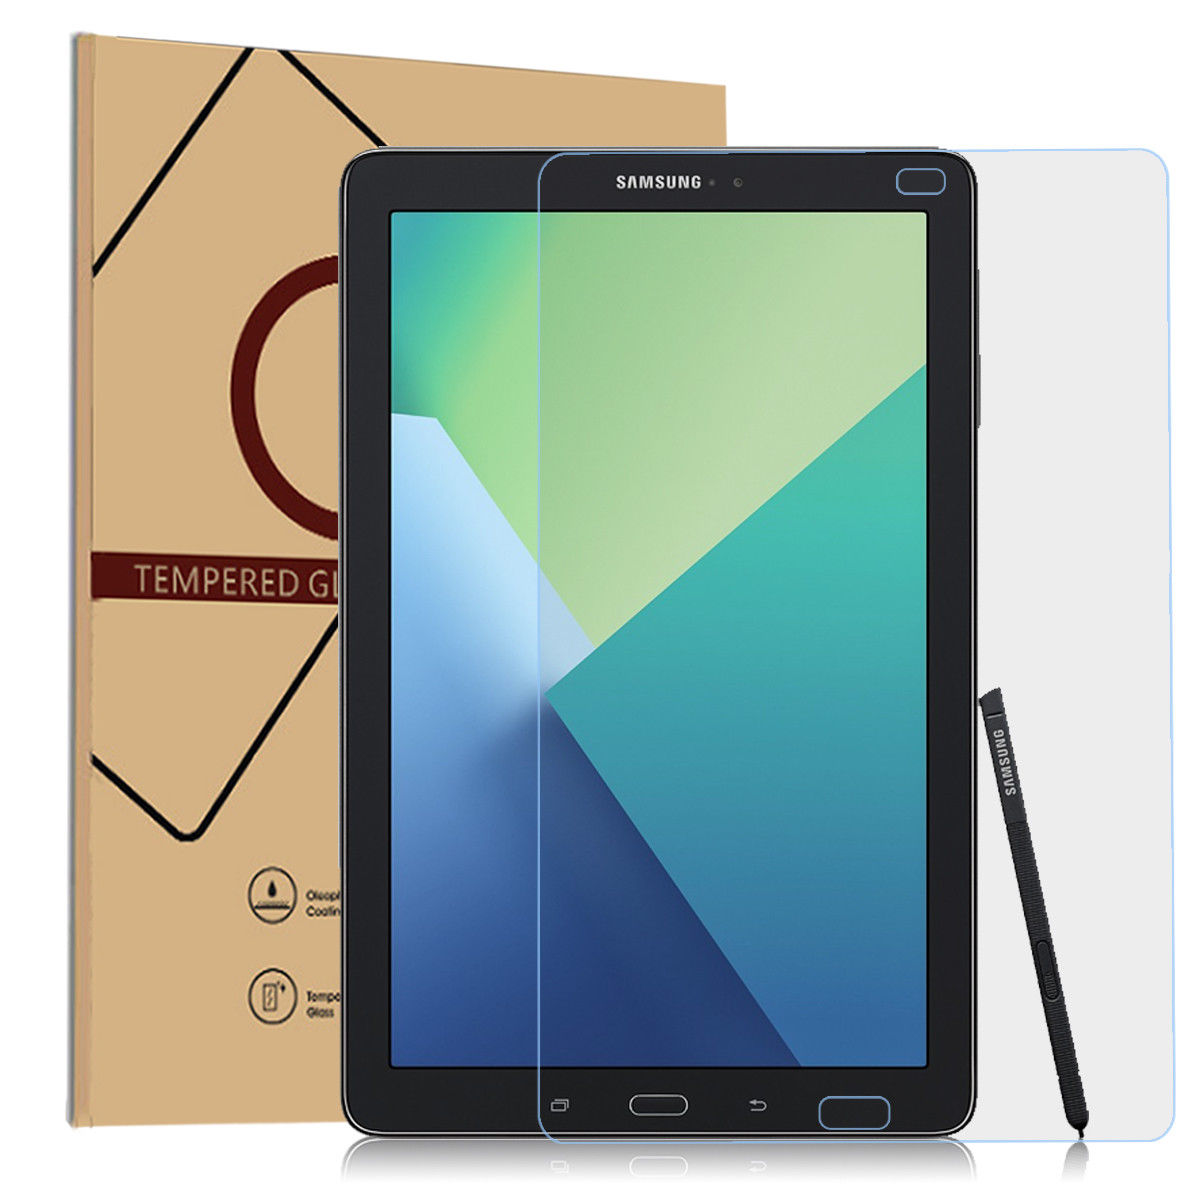 Galaxy Tab A 10.1 with S Pen Screen Protector, Mignova Tempered Glass Screen Protector with Anti-Scratch, Bubble Free for Samsung Galaxy Tab A 10.1 (with S Pen Model) SM-P580 [1-Pack] - image 1 of 6